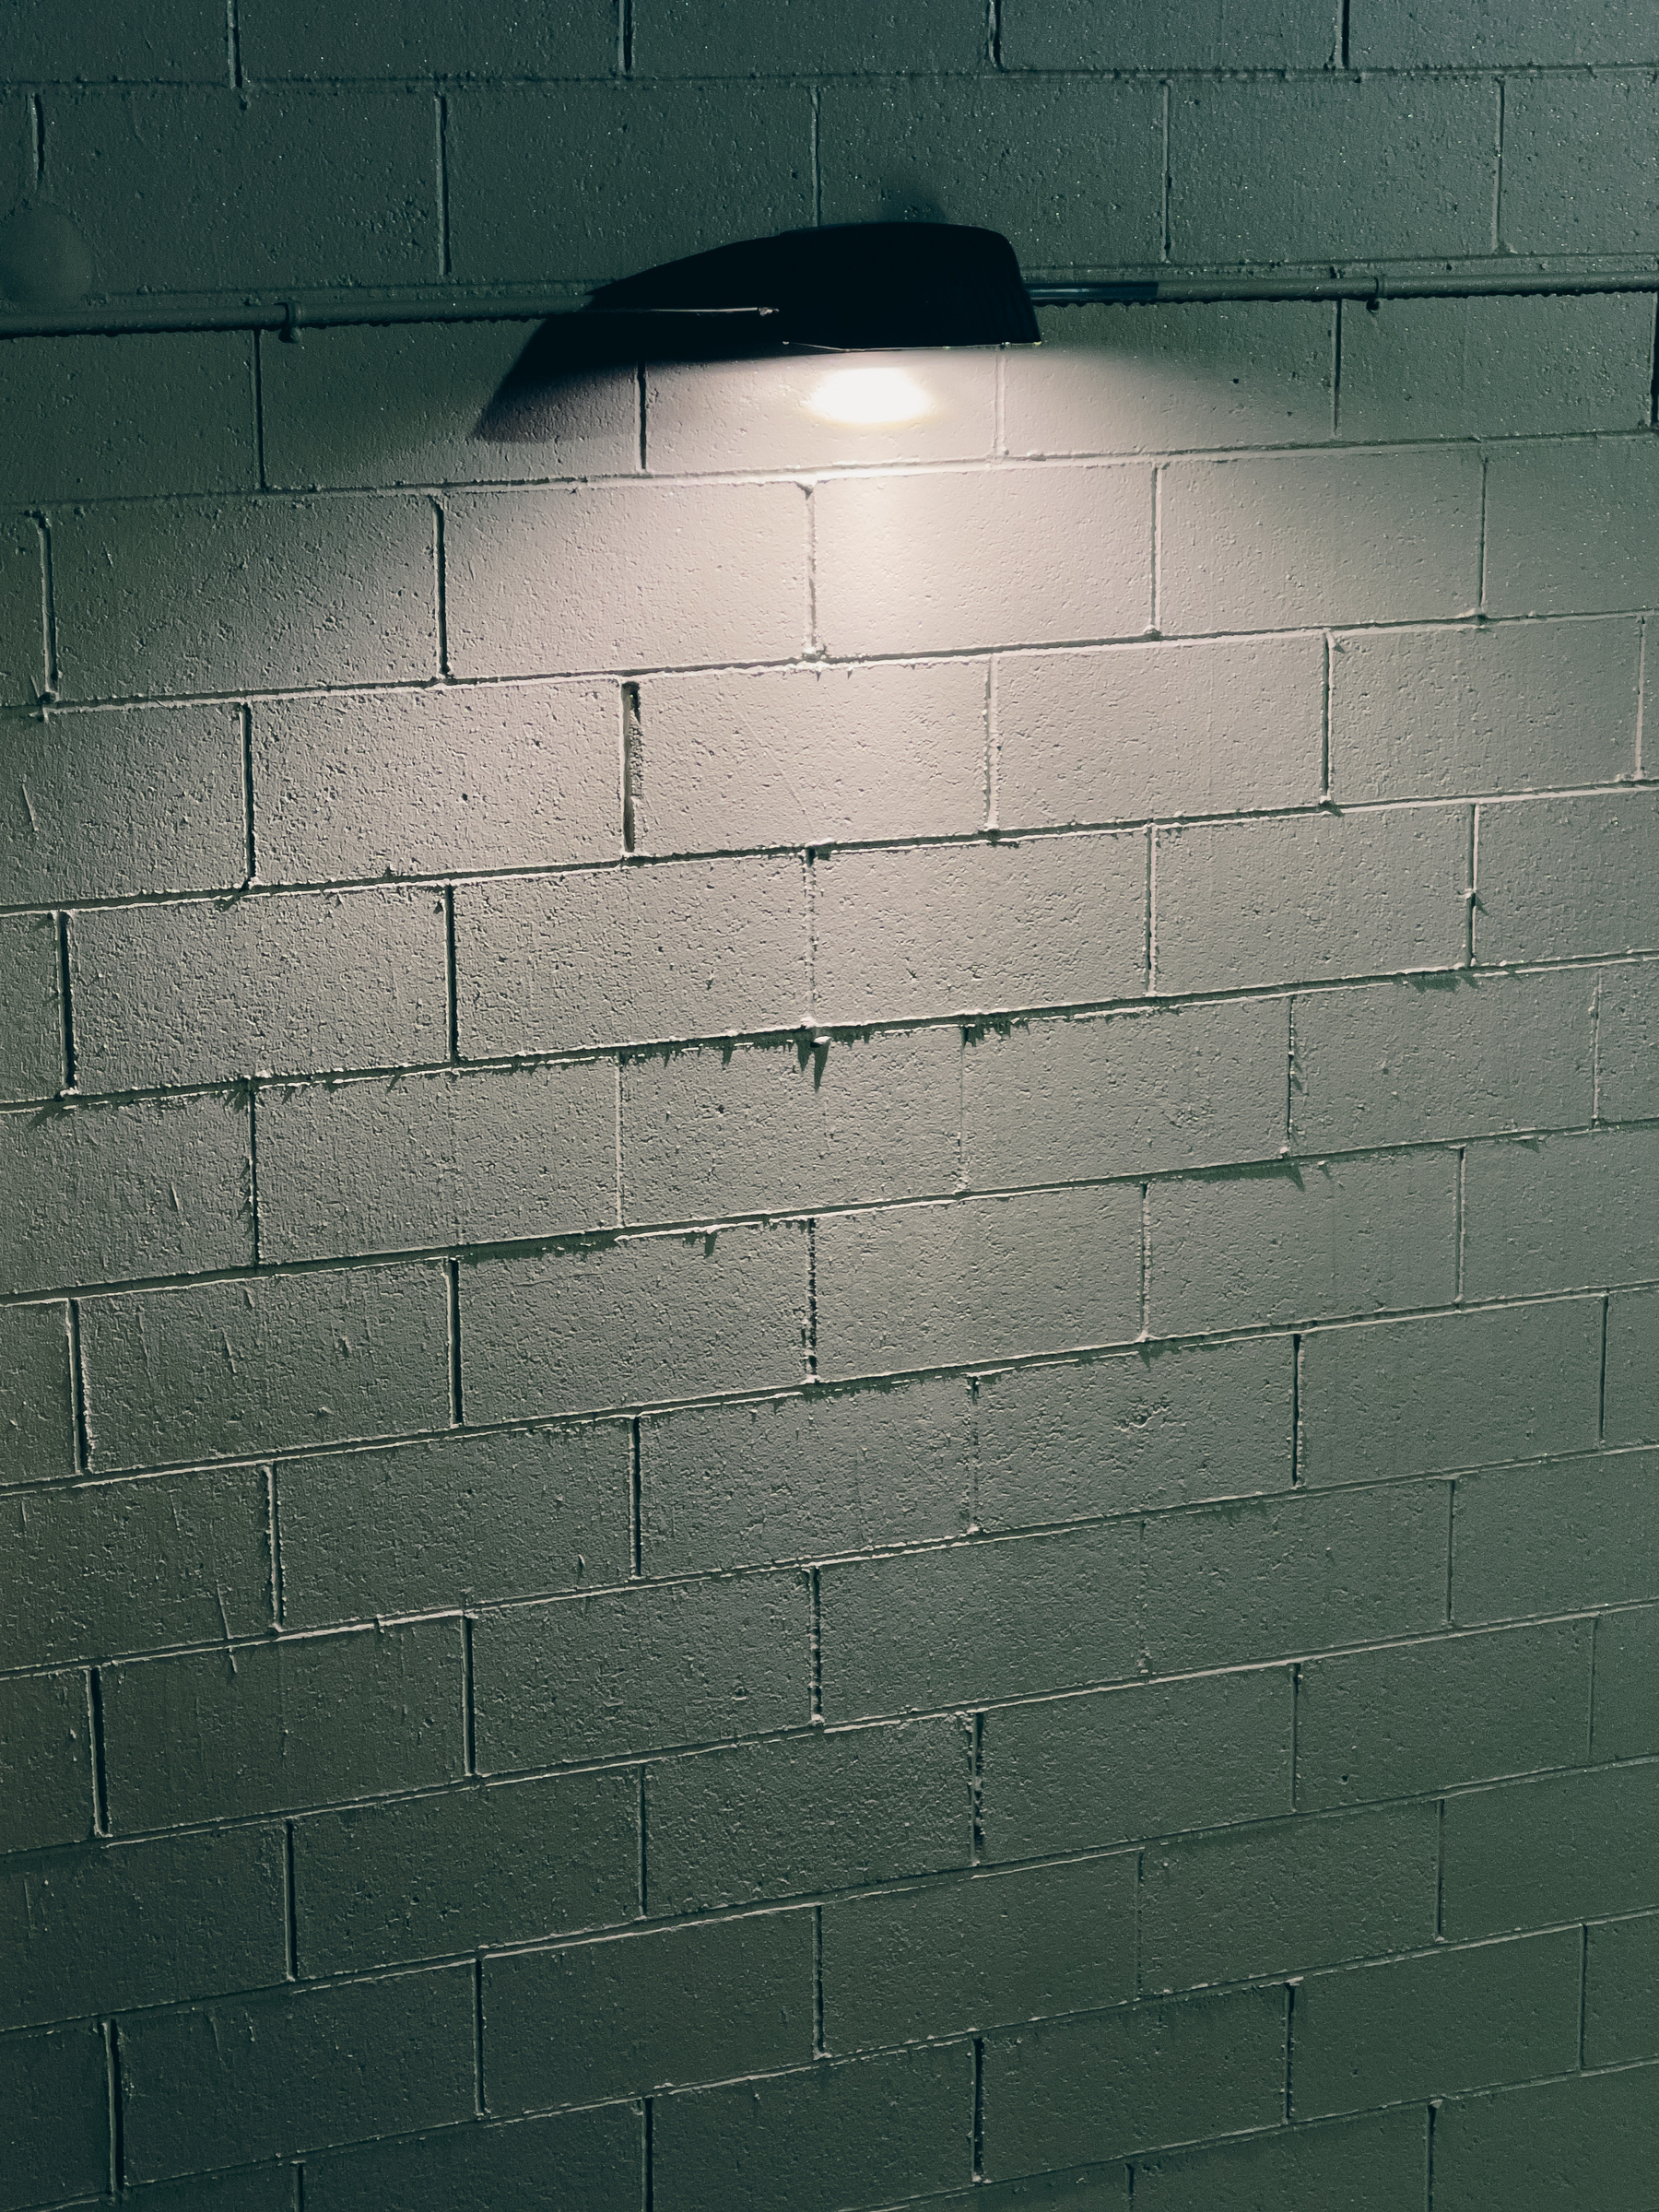 Security light attached to concrete block wall, illuminating it and picking out the joints between the blocks.